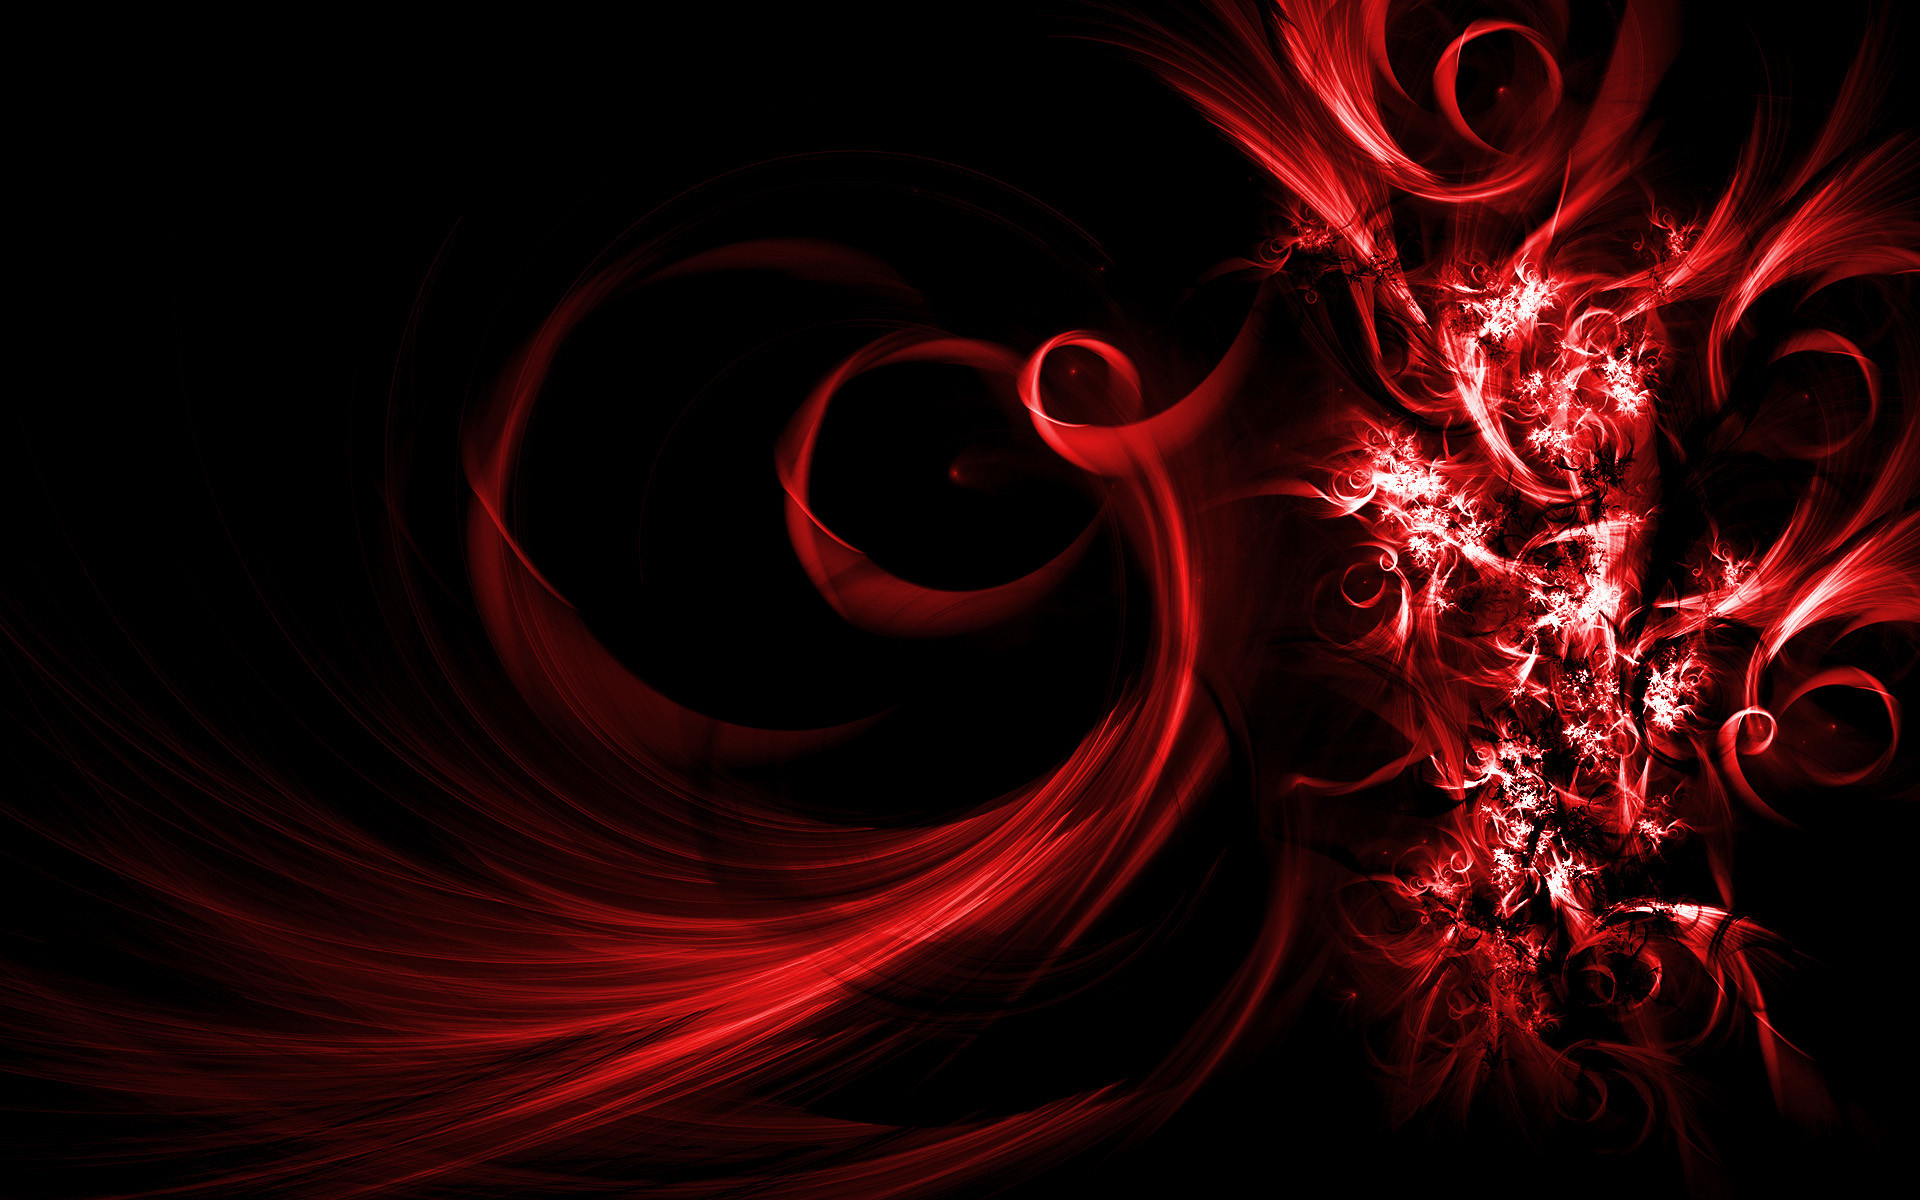 1920x1200 Red And Black Wallpaper Designs 12 Free Hd Wallpaper. Red And Black  Wallpaper Designs 12 Free Hd Wallpaper